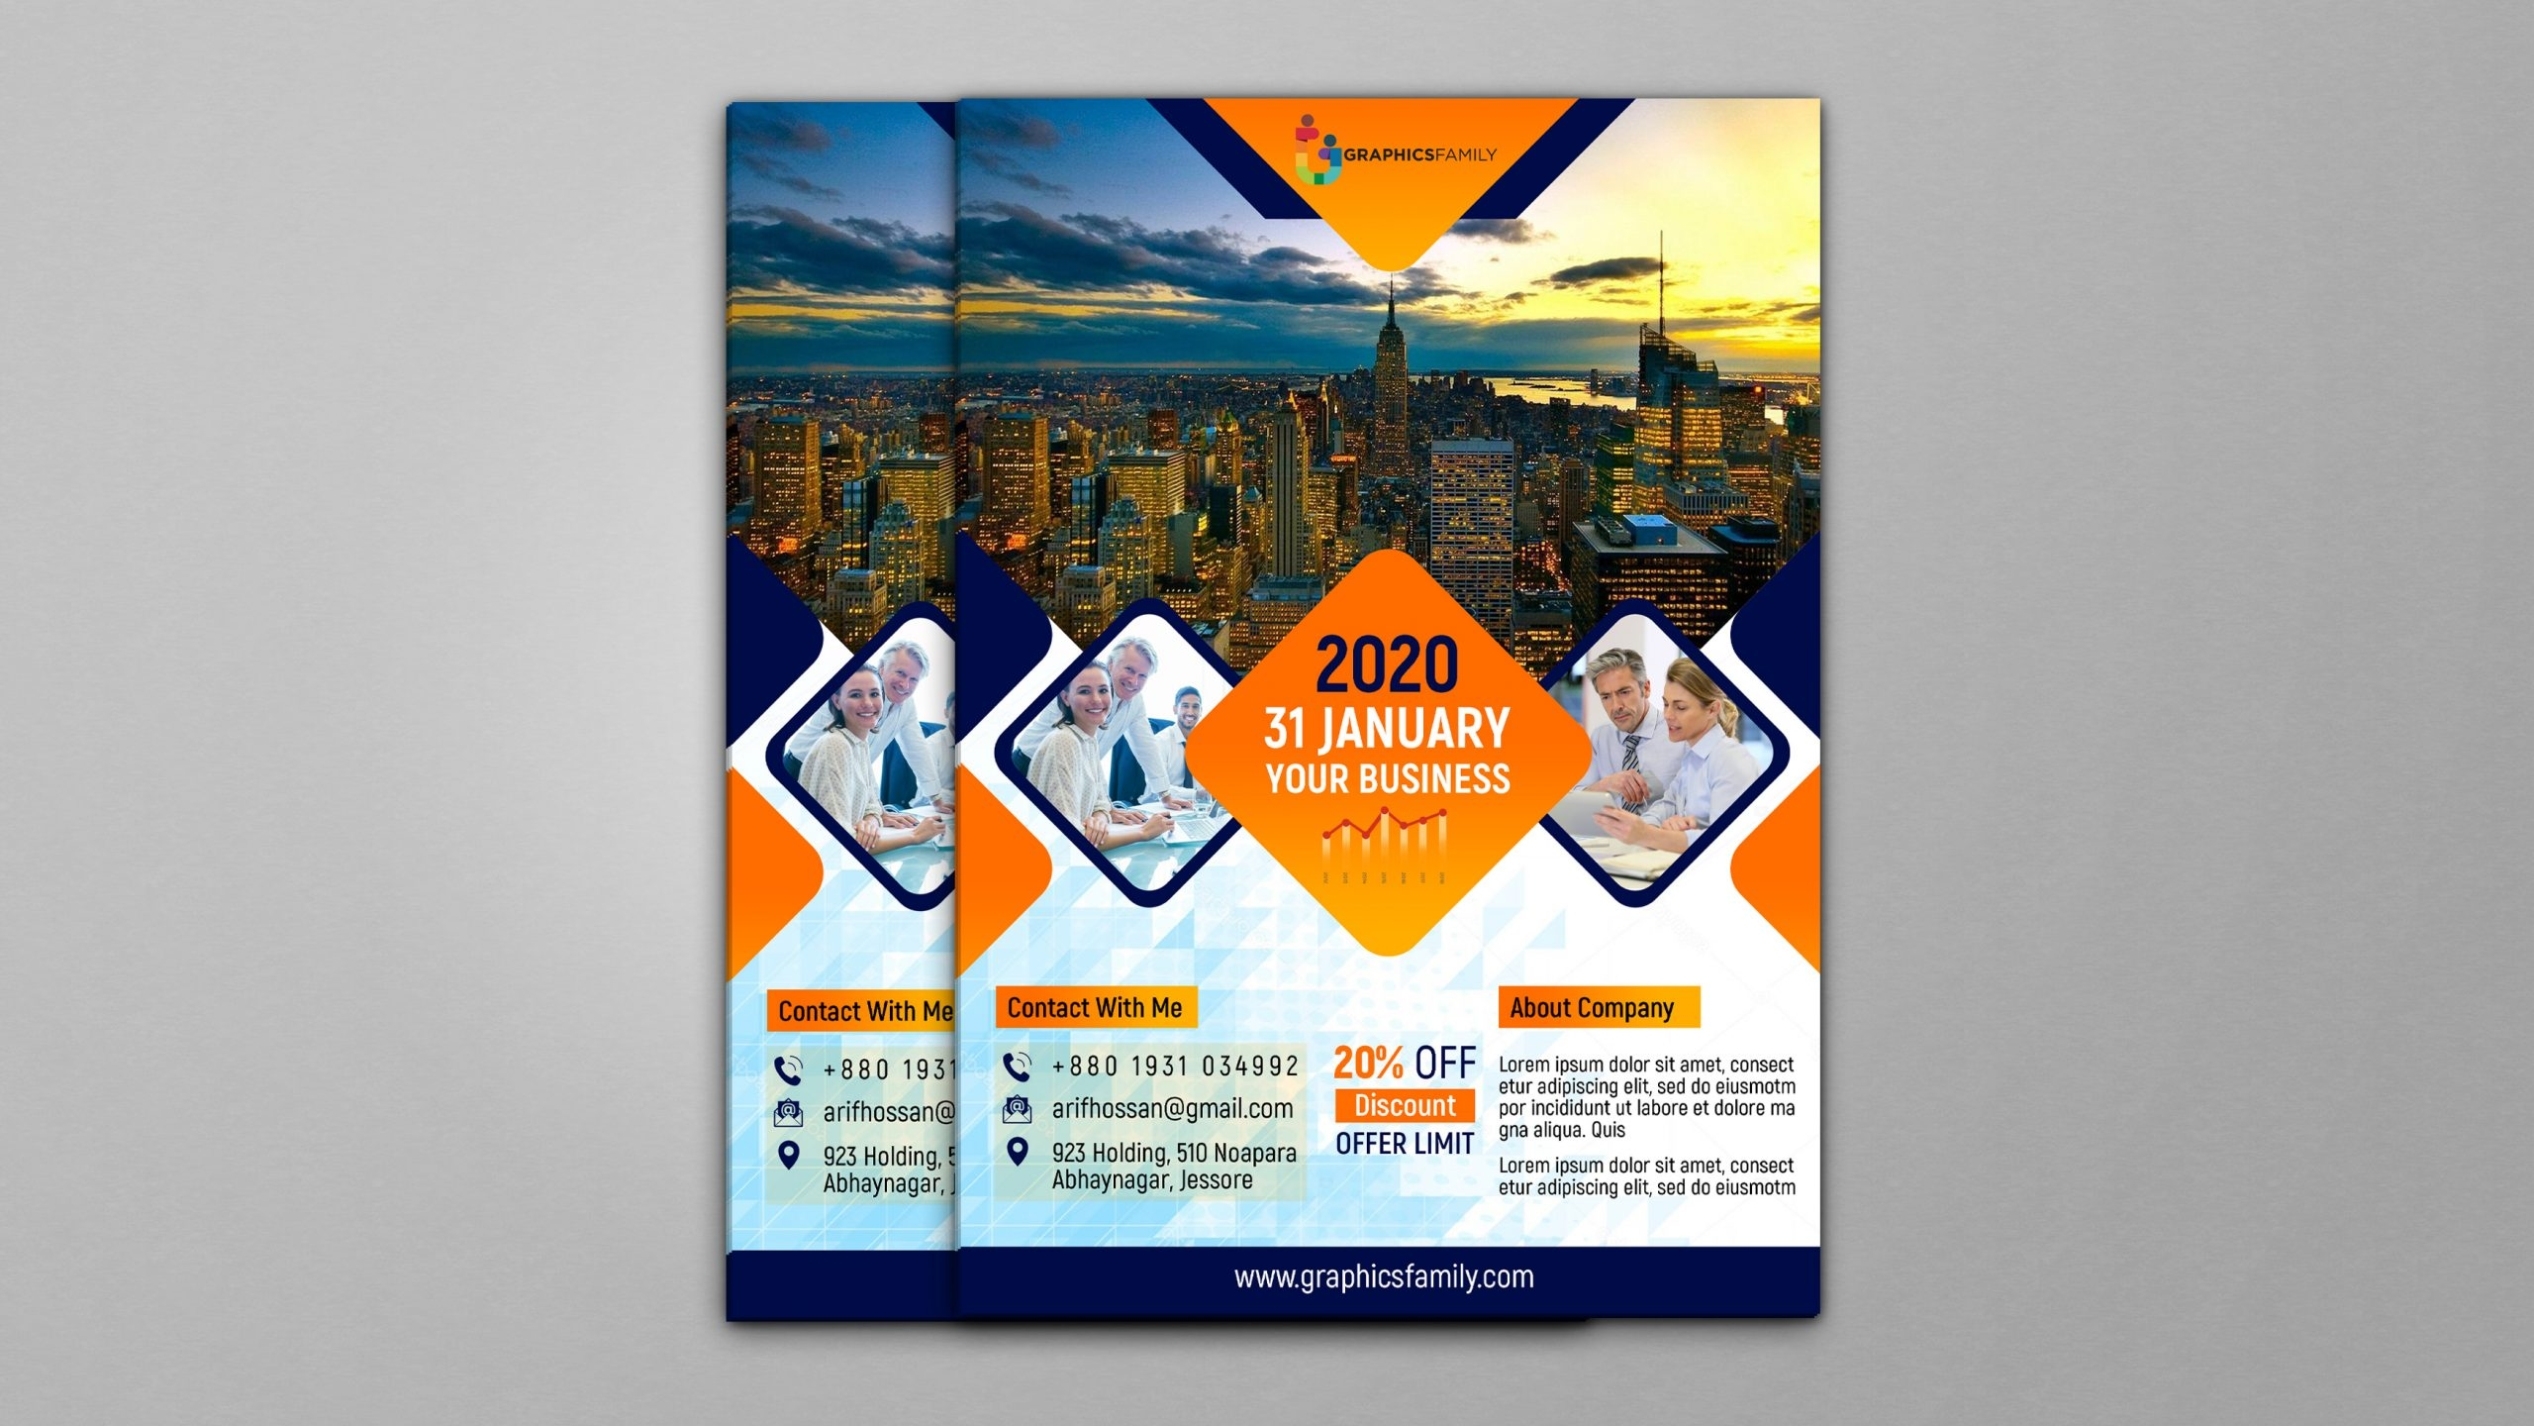 Colorful Business Flyer Free Psd Template – Graphicsfamily In Design Flyers Templates Online Free